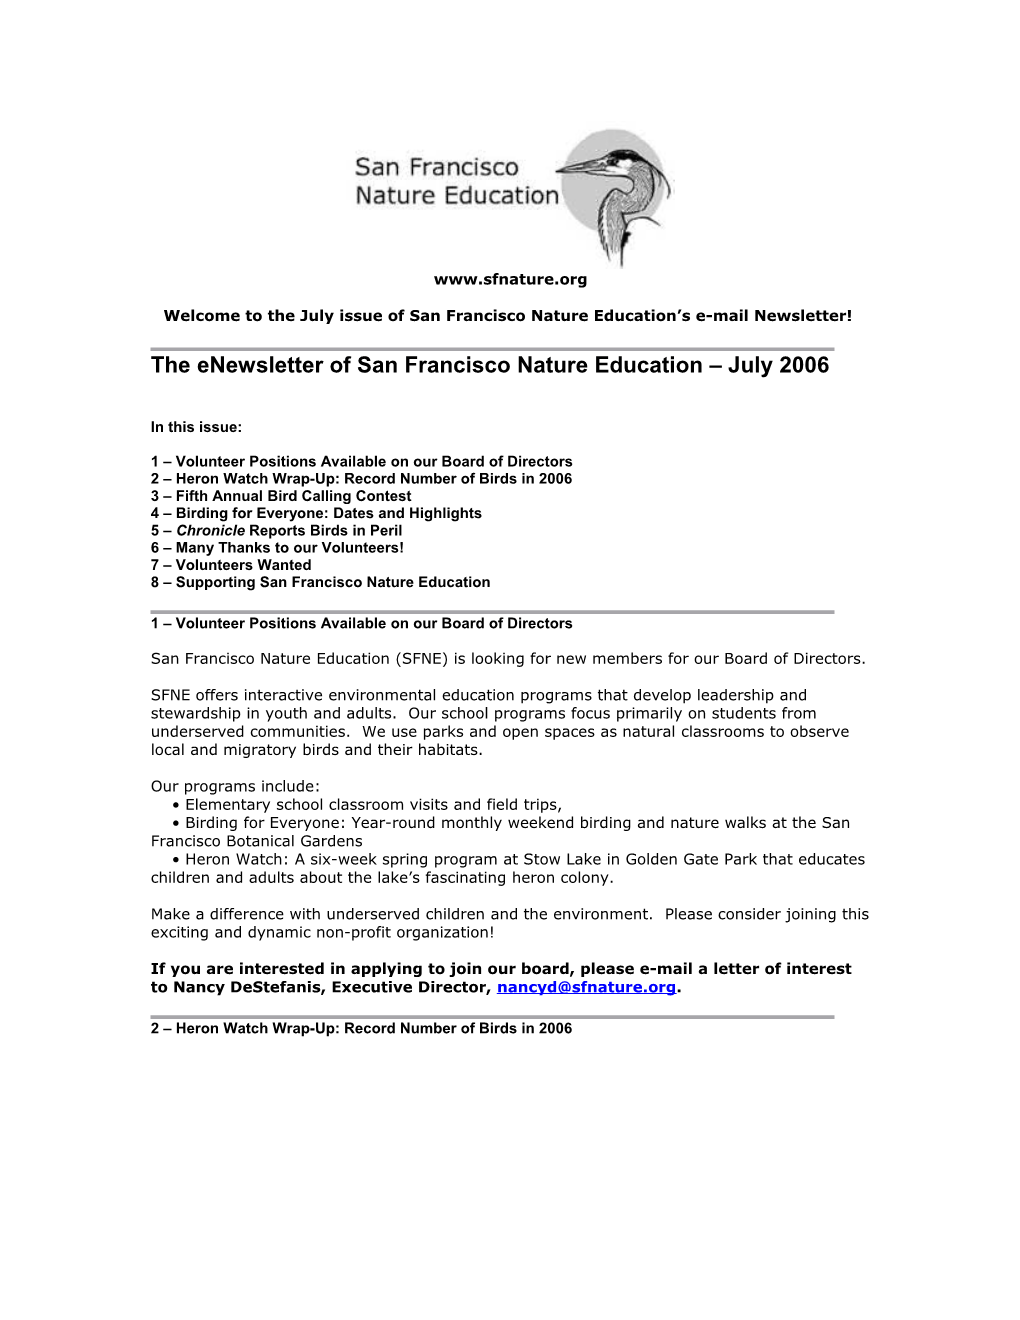 The Enewsletter of San Francisco Nature Education July 2006